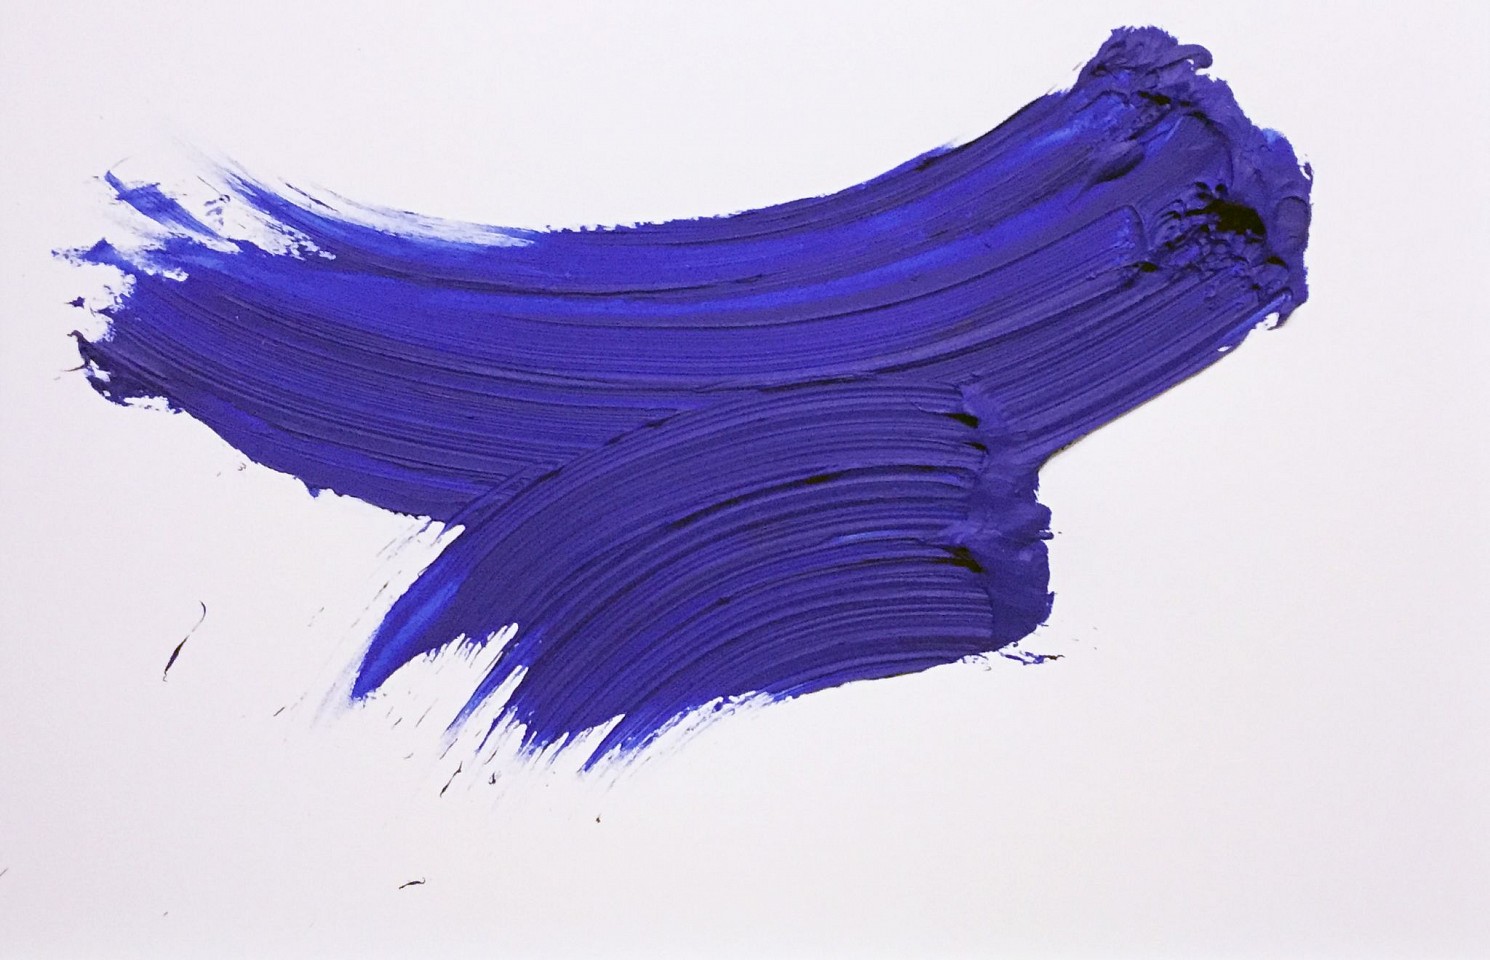 Donald Martiny, Untitled, 2017
polymer and pigment on paper, 22.75 x 30.5 in. paper
30 x 38 in. frame
blue framed
MART0047